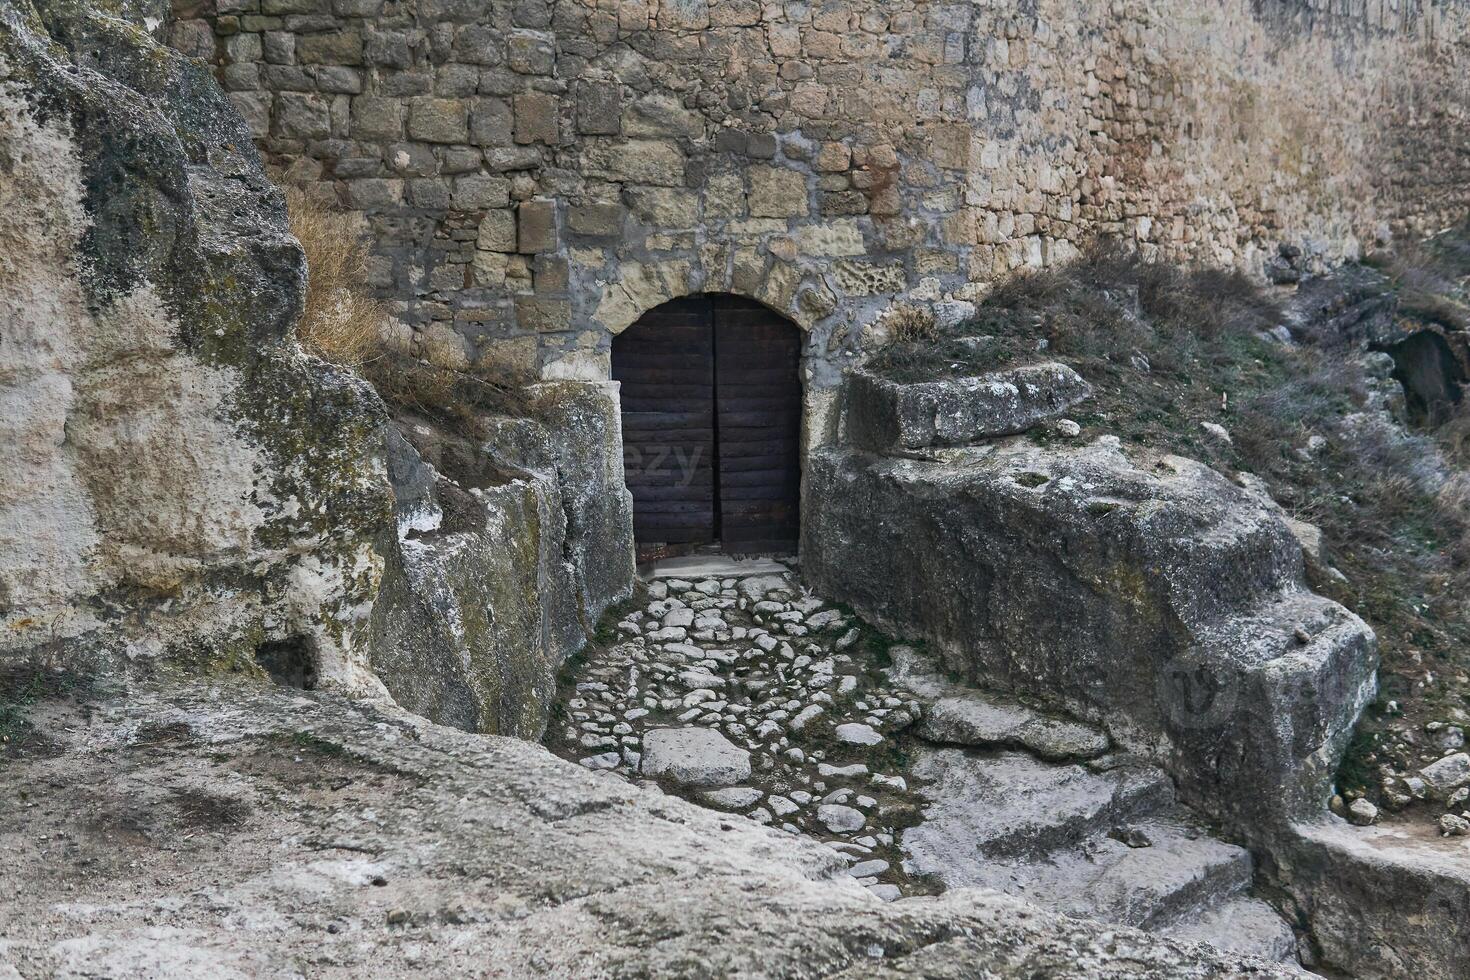 iron-clad gate to a medieval cave city-fortress photo